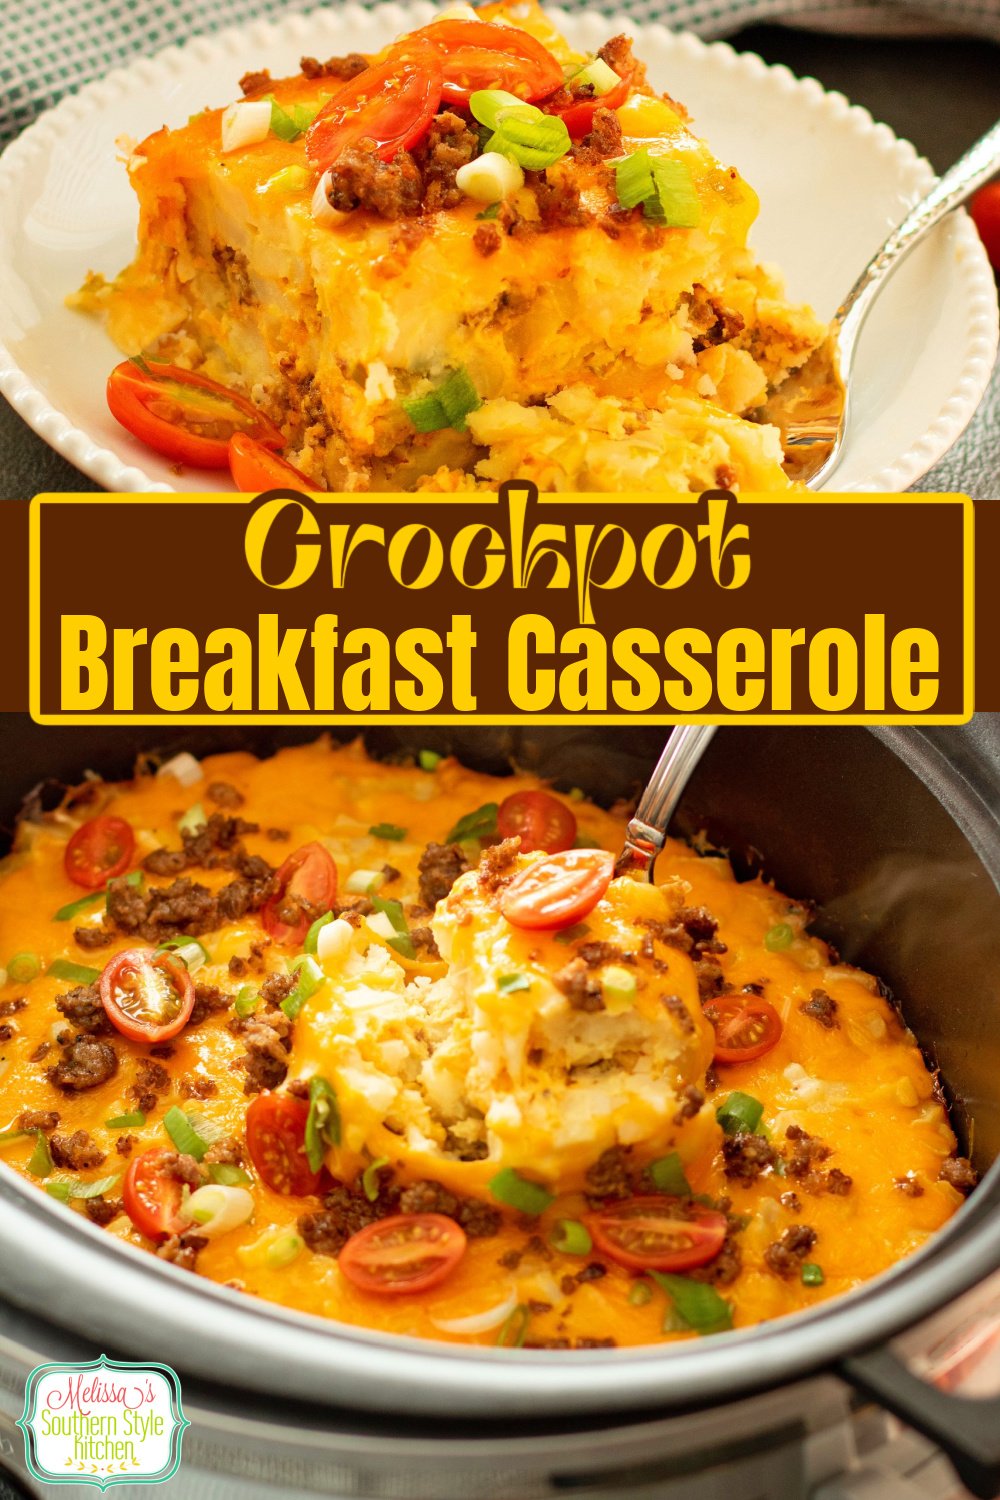 This easy Crockpot Breakfast Casserole can be fully assembled and cooked overnight for a delicious start to the day #crockpotcasserole #crockpotrecipes #slowcookerrecipes #breakfastcasserole #crockpothashbrowns #crockpotbreakfastcasserole #breakfastrecipes via @melissasssk